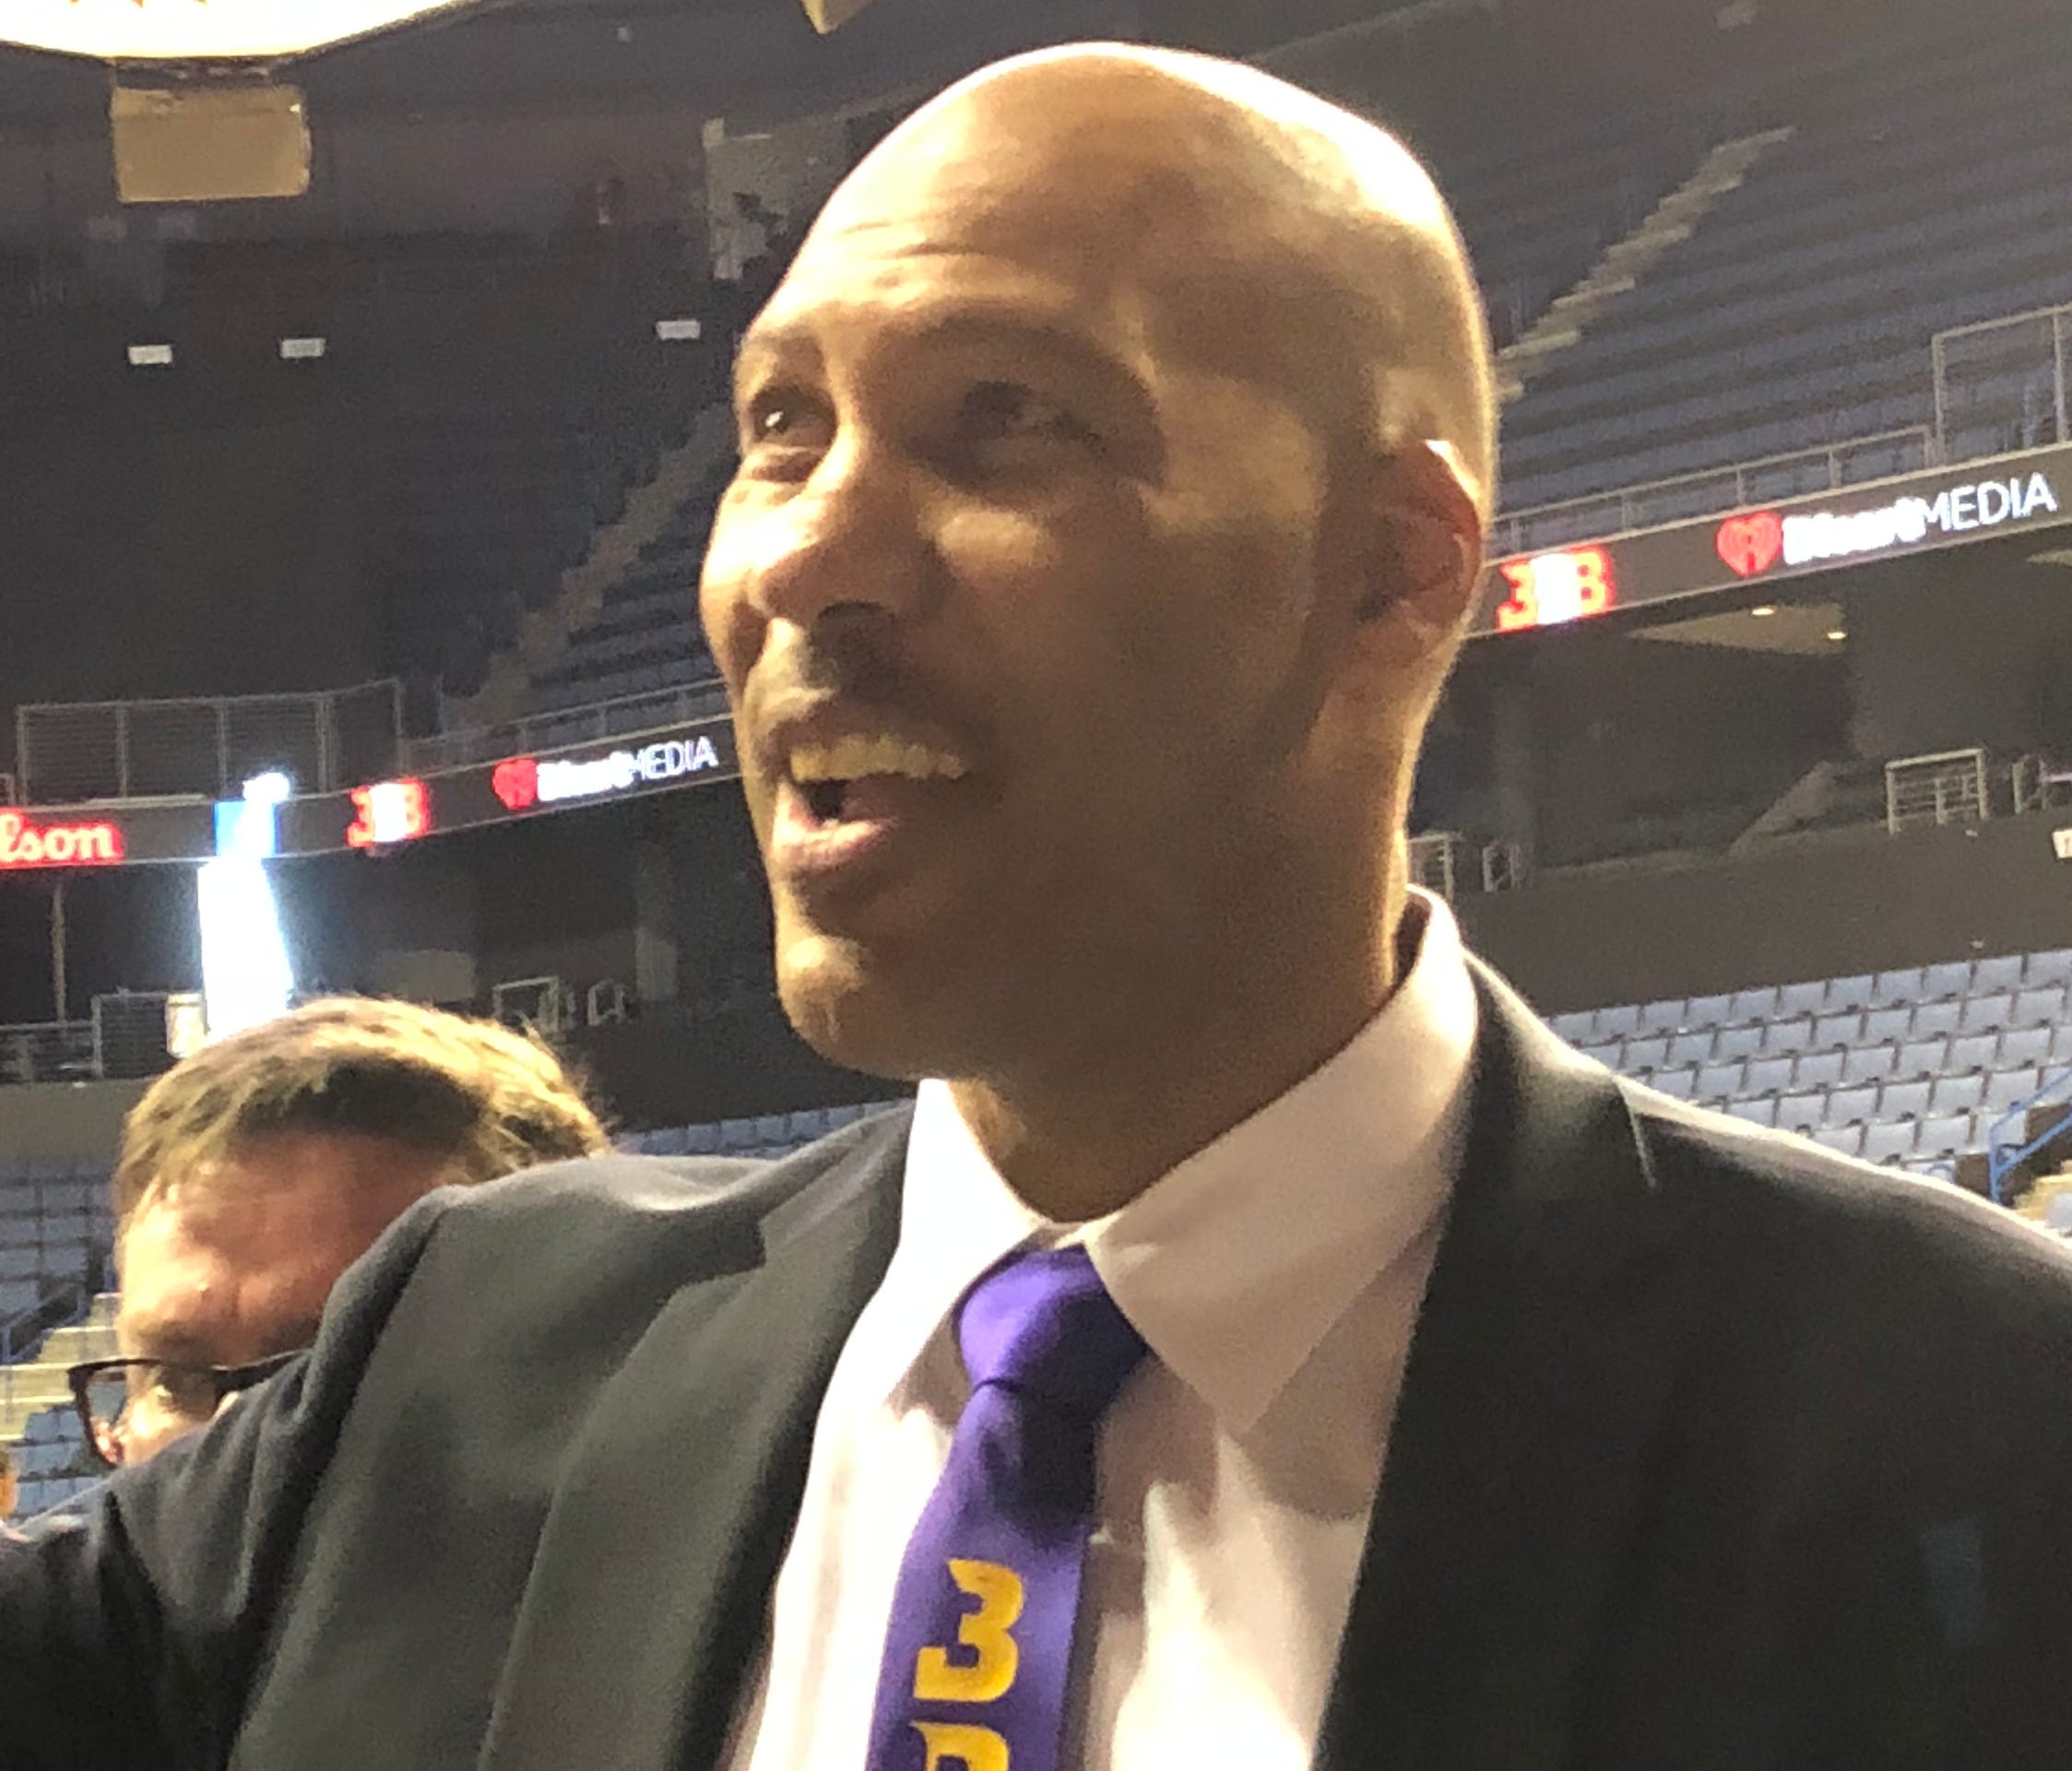 Opening night for the Junior Basketball Association, a league LaVar Ball formed to appeal to NBA hopefuls who don't want to play college basketball. Ball talks with fans before the first game.